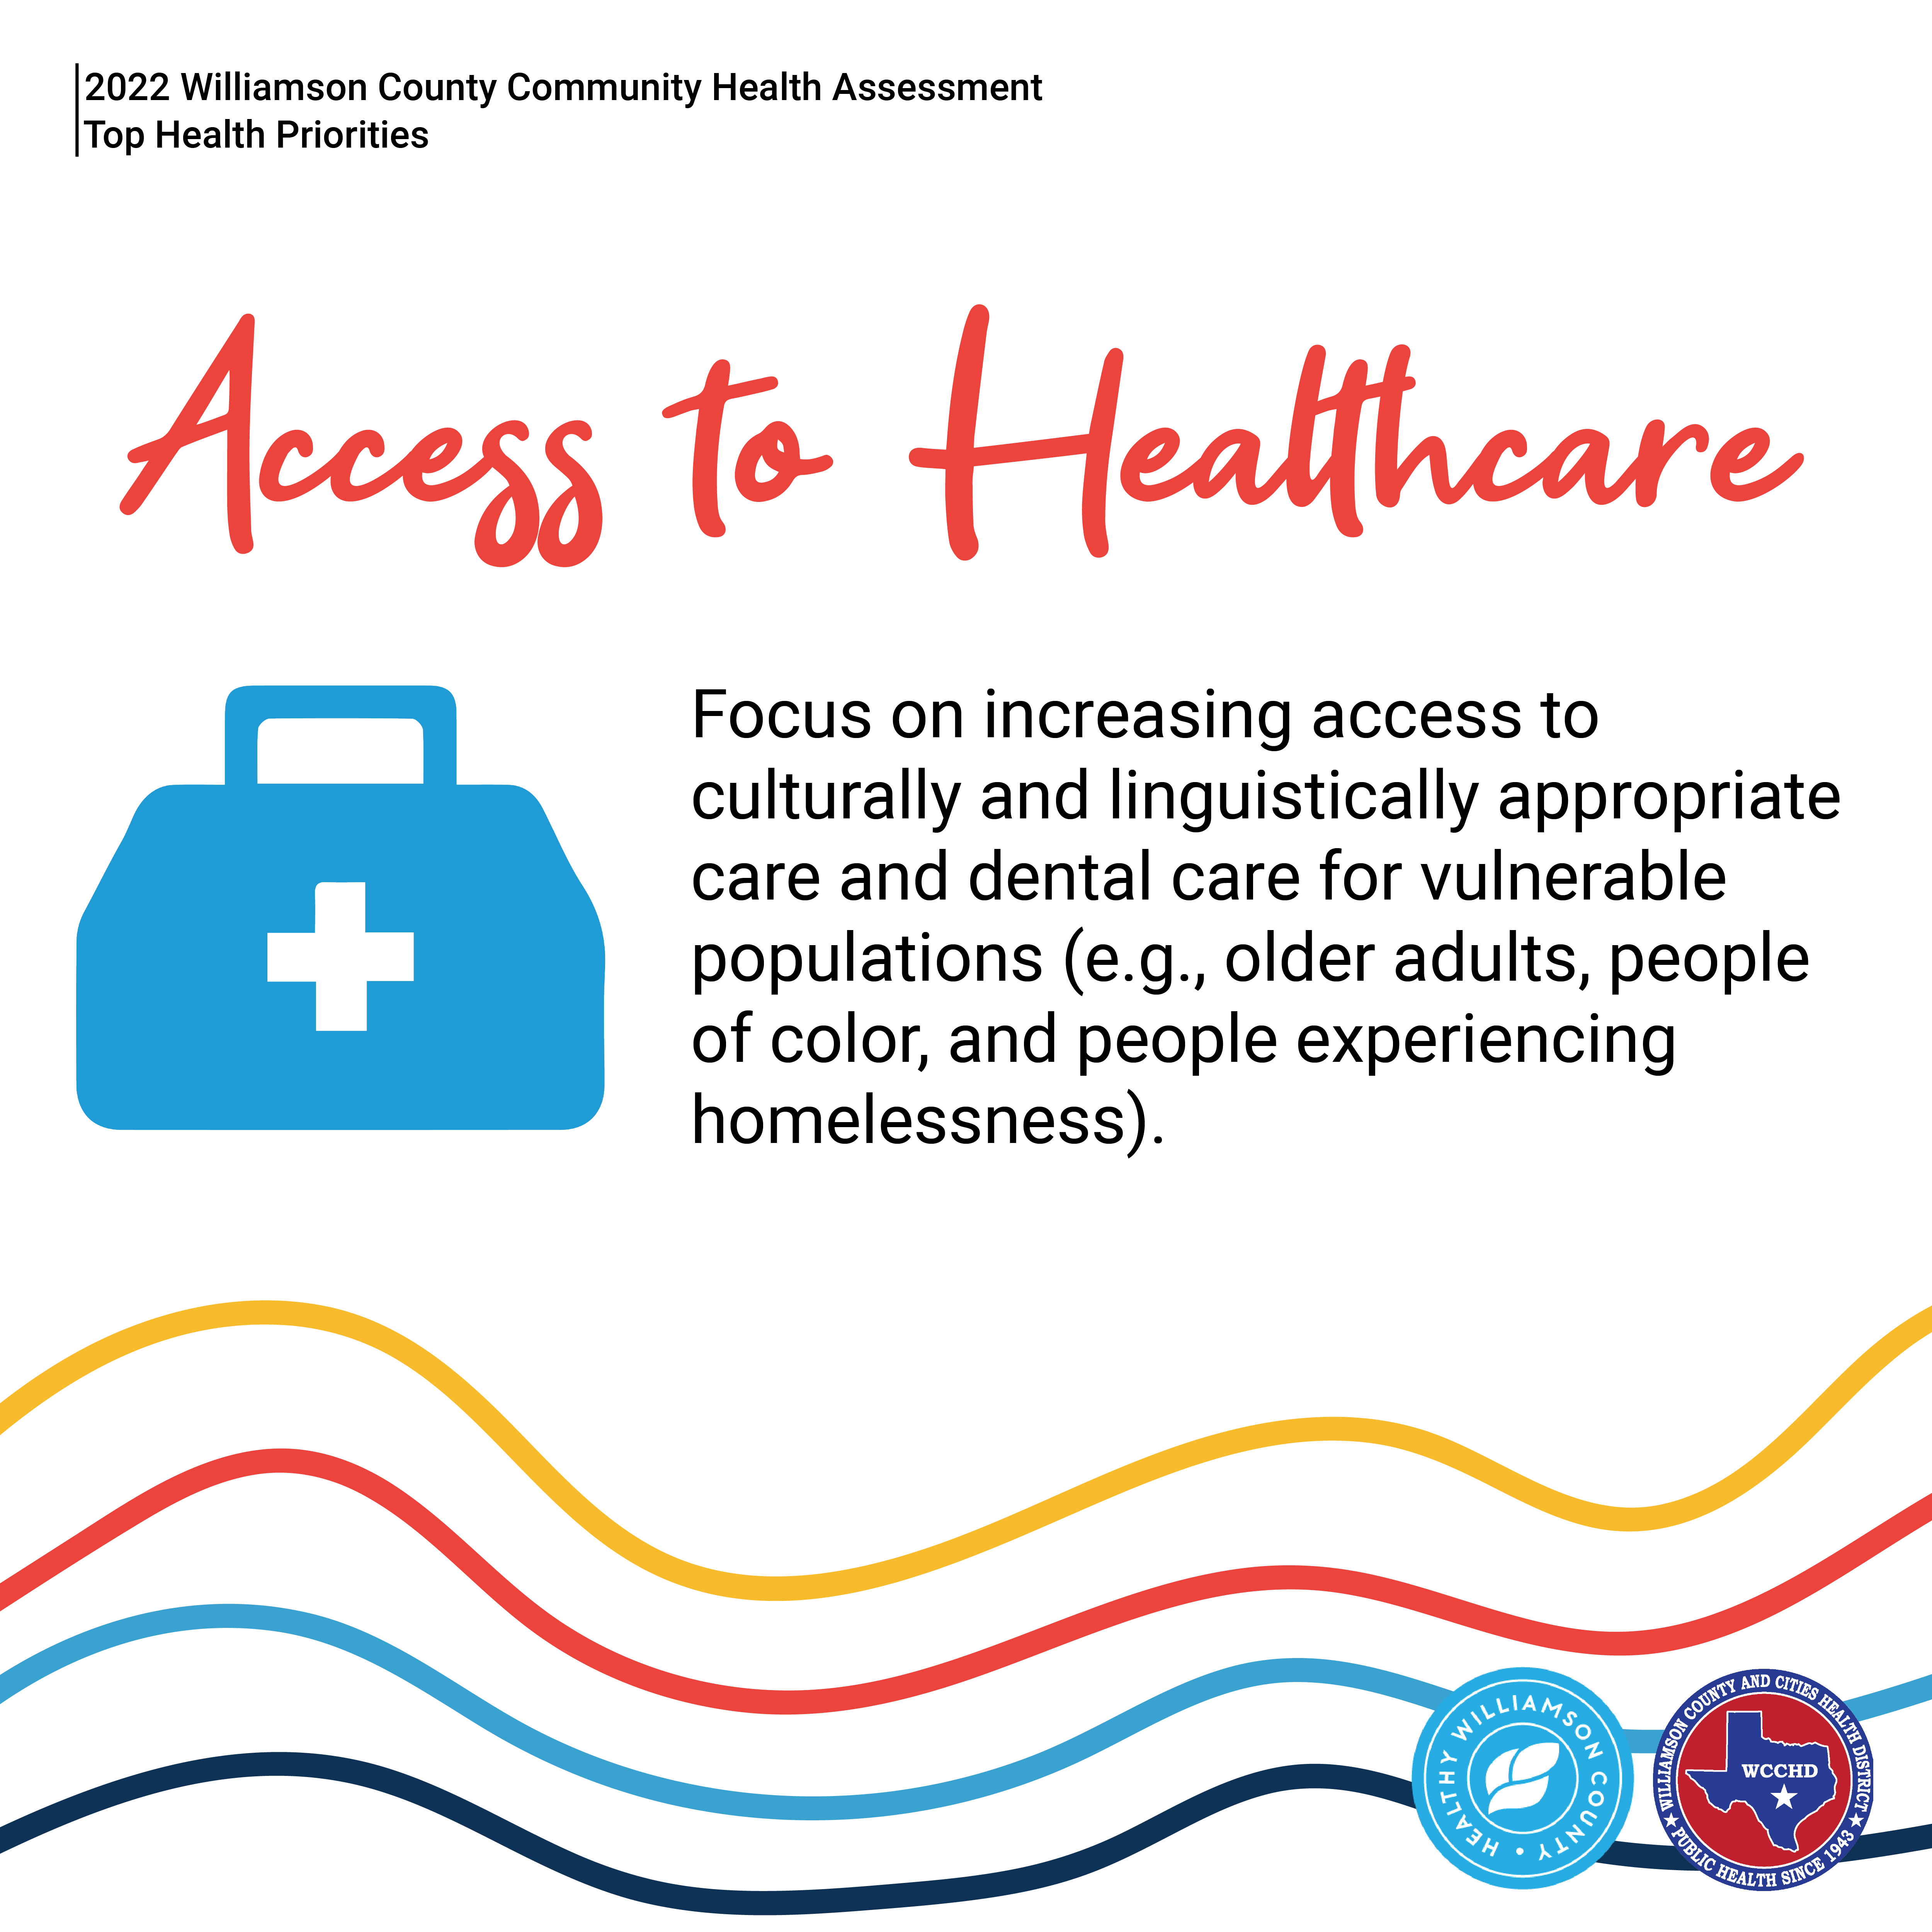 2022 Williamson County Community Health Assessment. Top Health Priorities. Access to Healthcare. Below, an icon of a medical bag. Text to the right: Focus on increasing access to culturally and linguistically appropriate care and dental care for vulnerable populations (e.g., older adults, people of color, and people experiencing homelessness). Multicolored squiggly lines. Logos of Healthy Williamson County and Williamson County and Cities Health District.